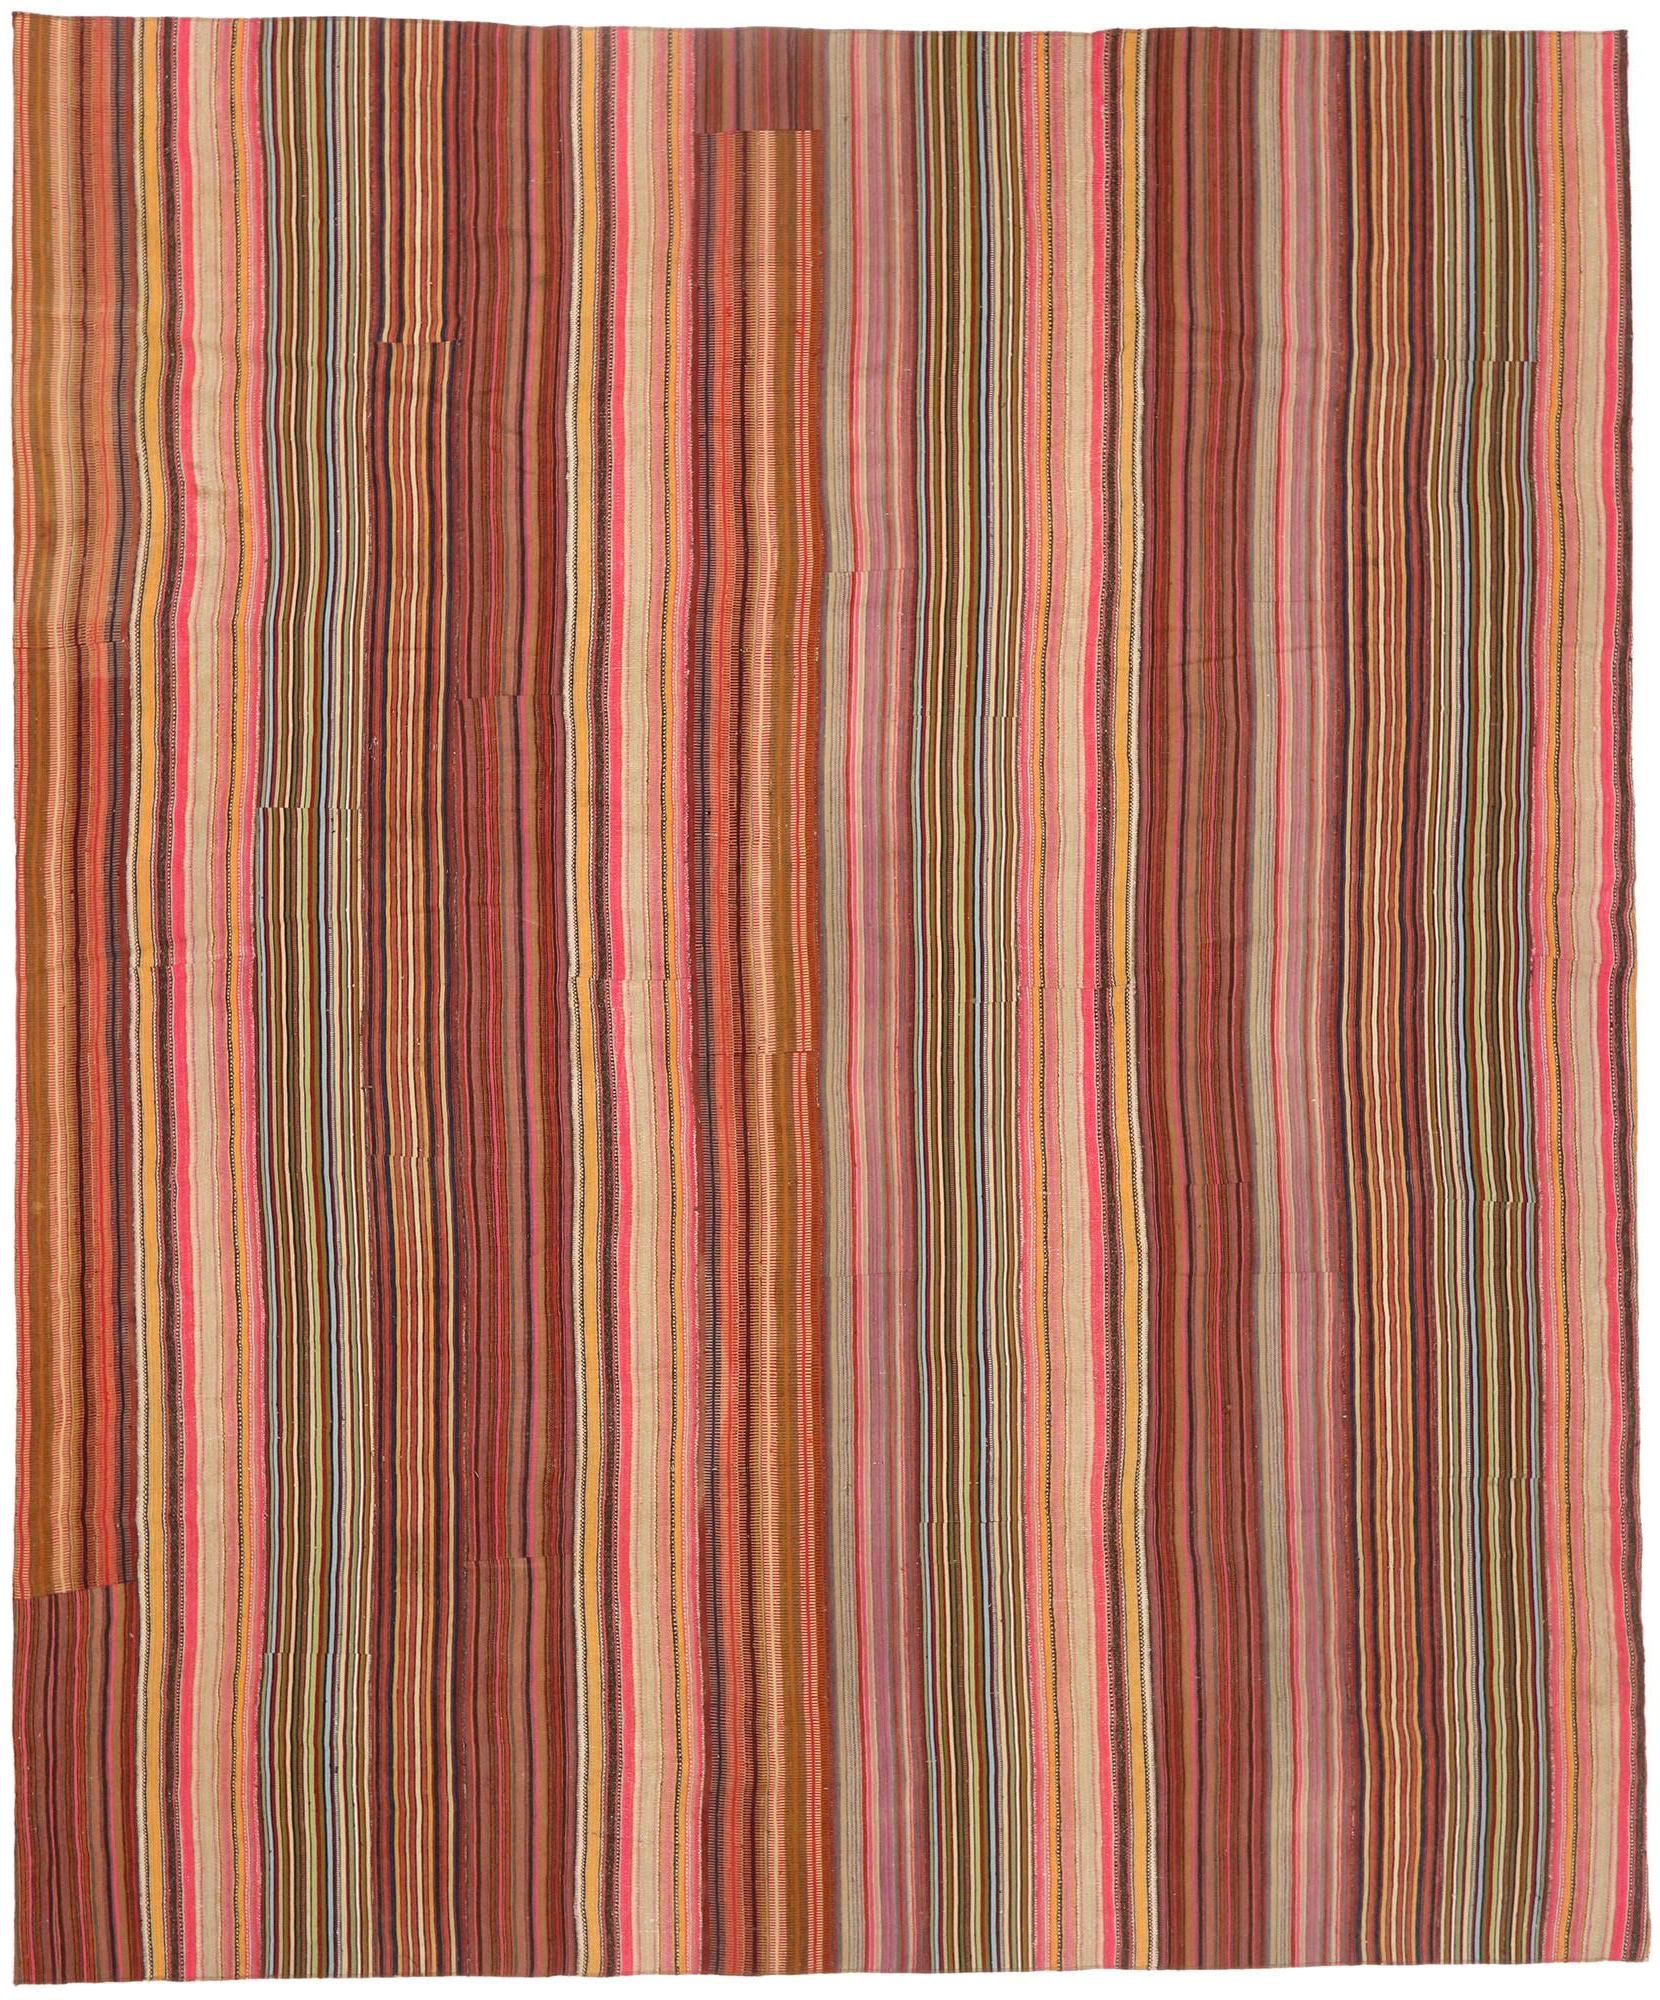 Hand-Woven Vintage Turkish Striped Kilim Rug with Modern Rustic Cabin Style For Sale